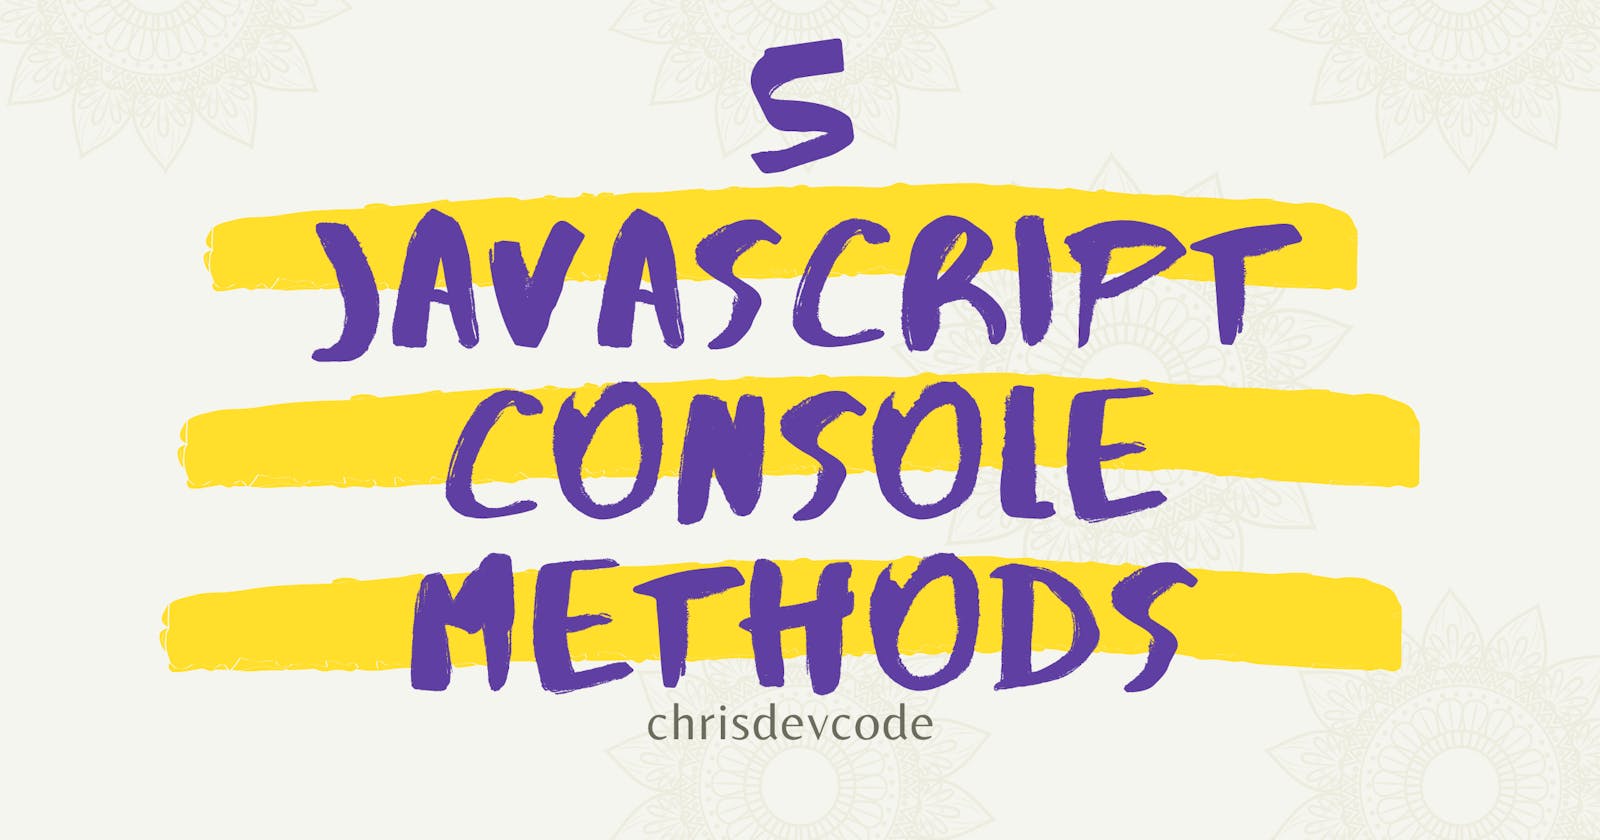 5 JavaScript Console Methods you should Know